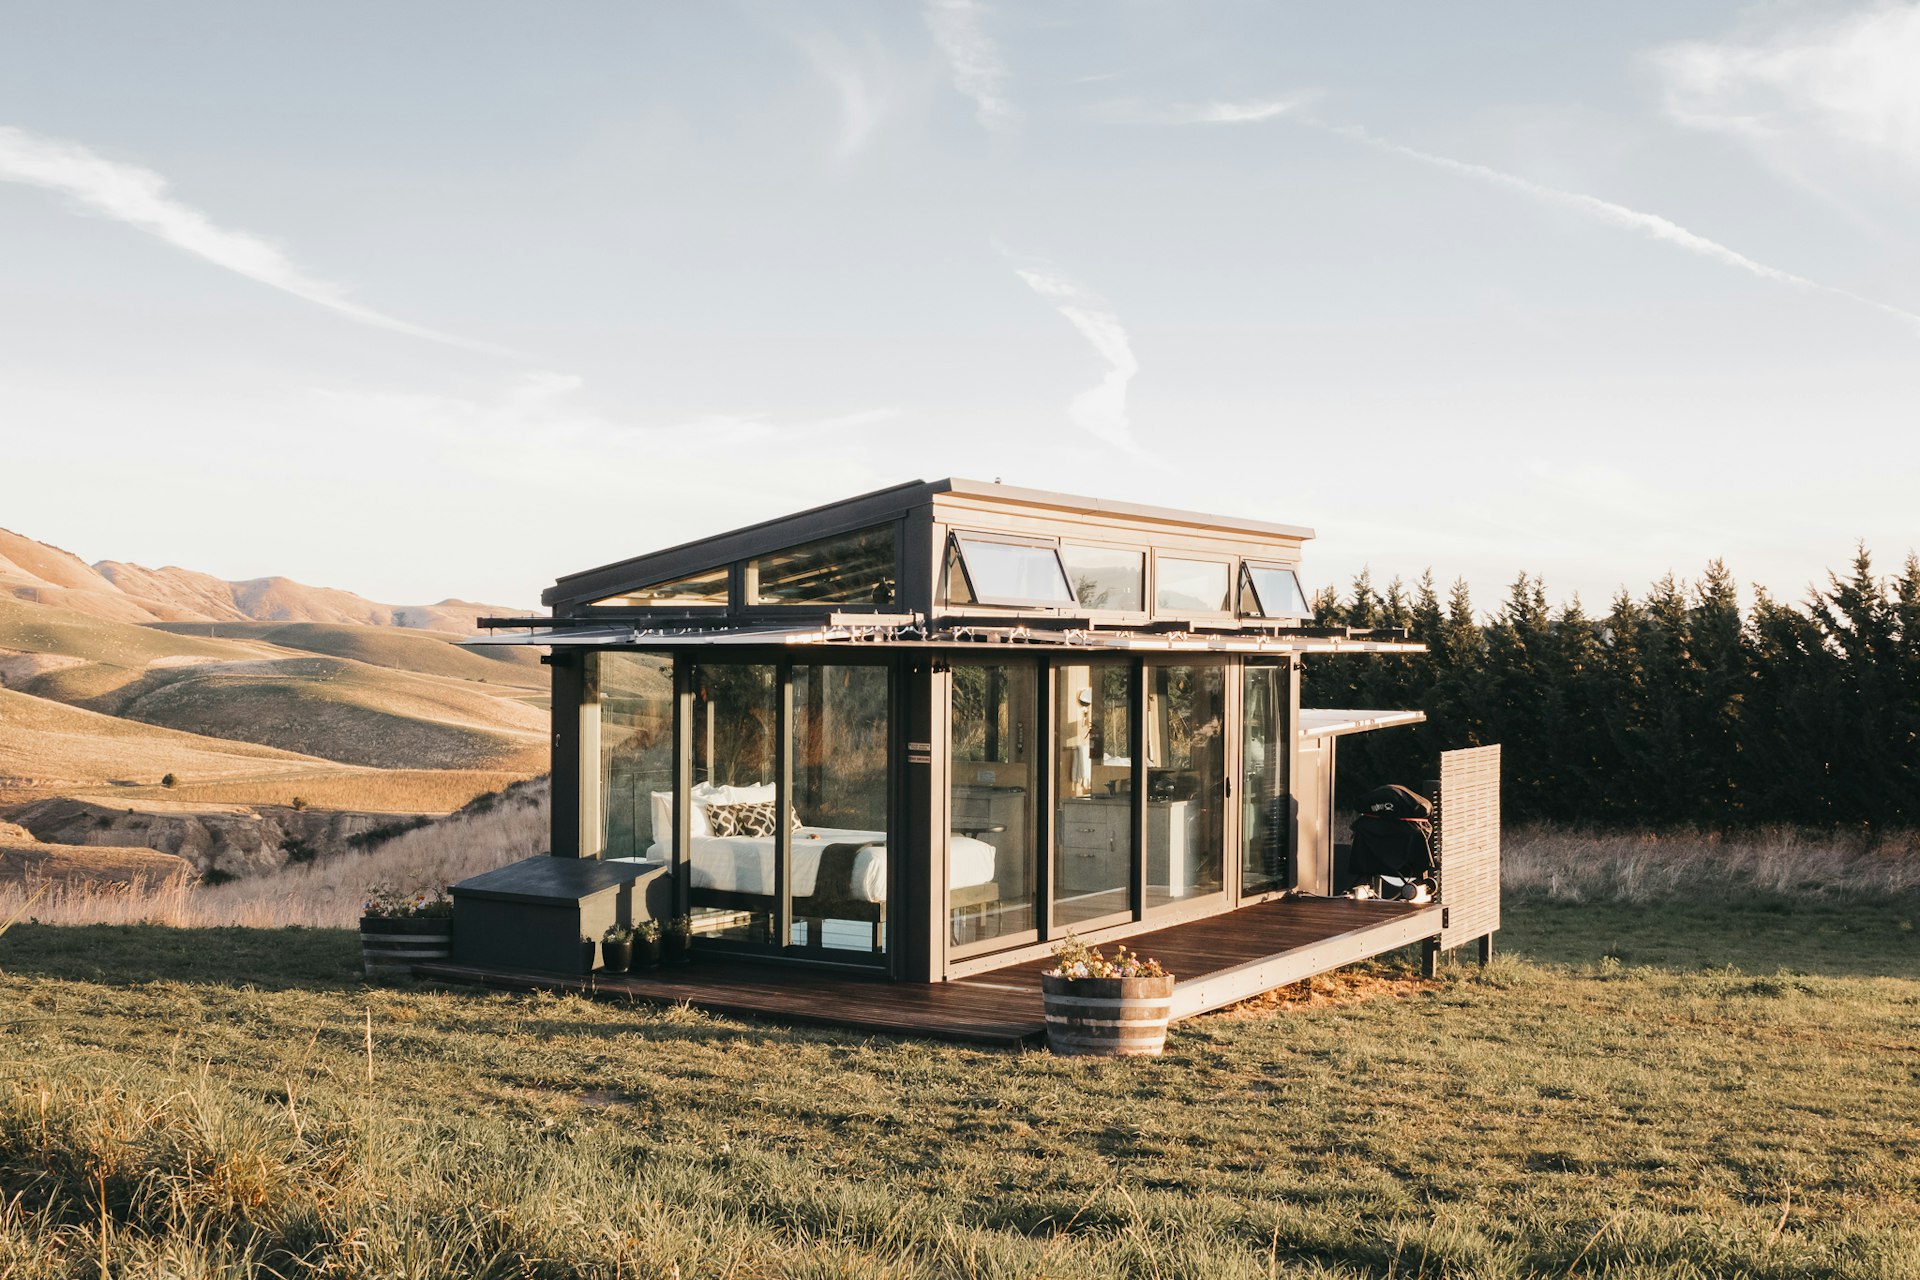 A simple wood-and-glass chalet stands on grass with a hedgerow behind it. Beyond, there are barren, rolling hills.